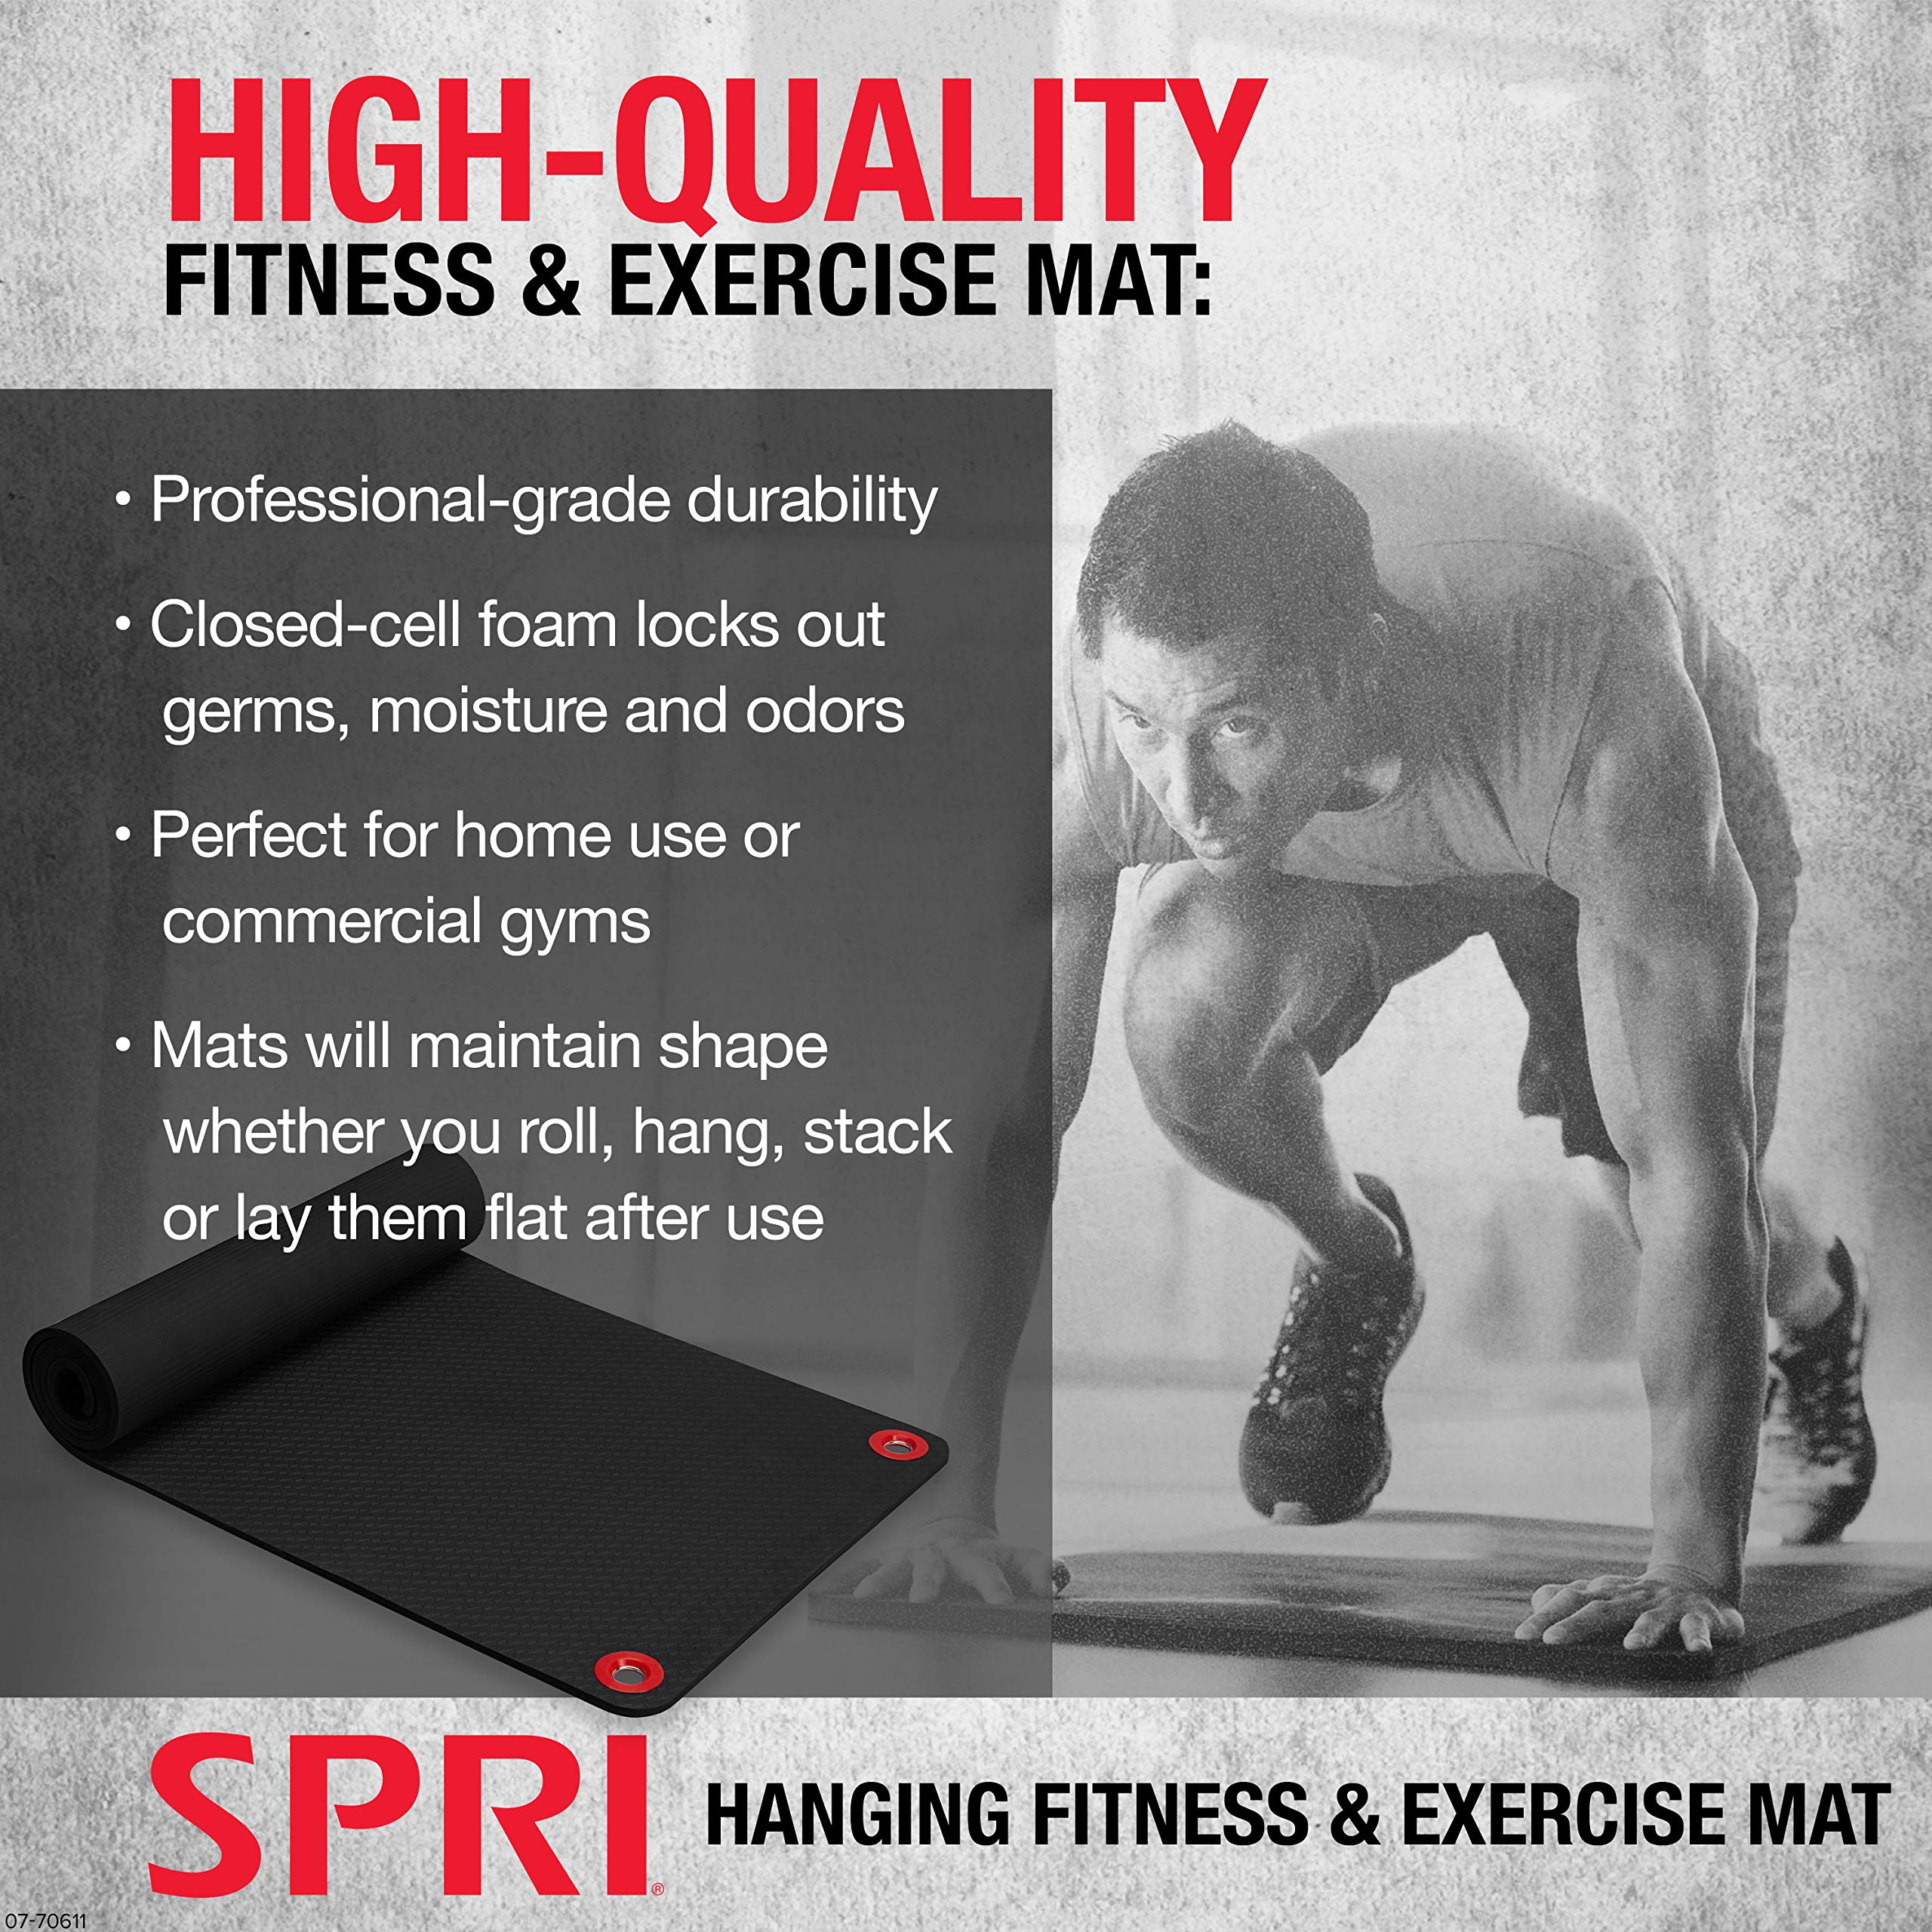 SPRI Hanging Exercise Mat, Fitness & Yoga Mat for Group Fitness Classes, Commercial Grade Quality with Reinforced Holes